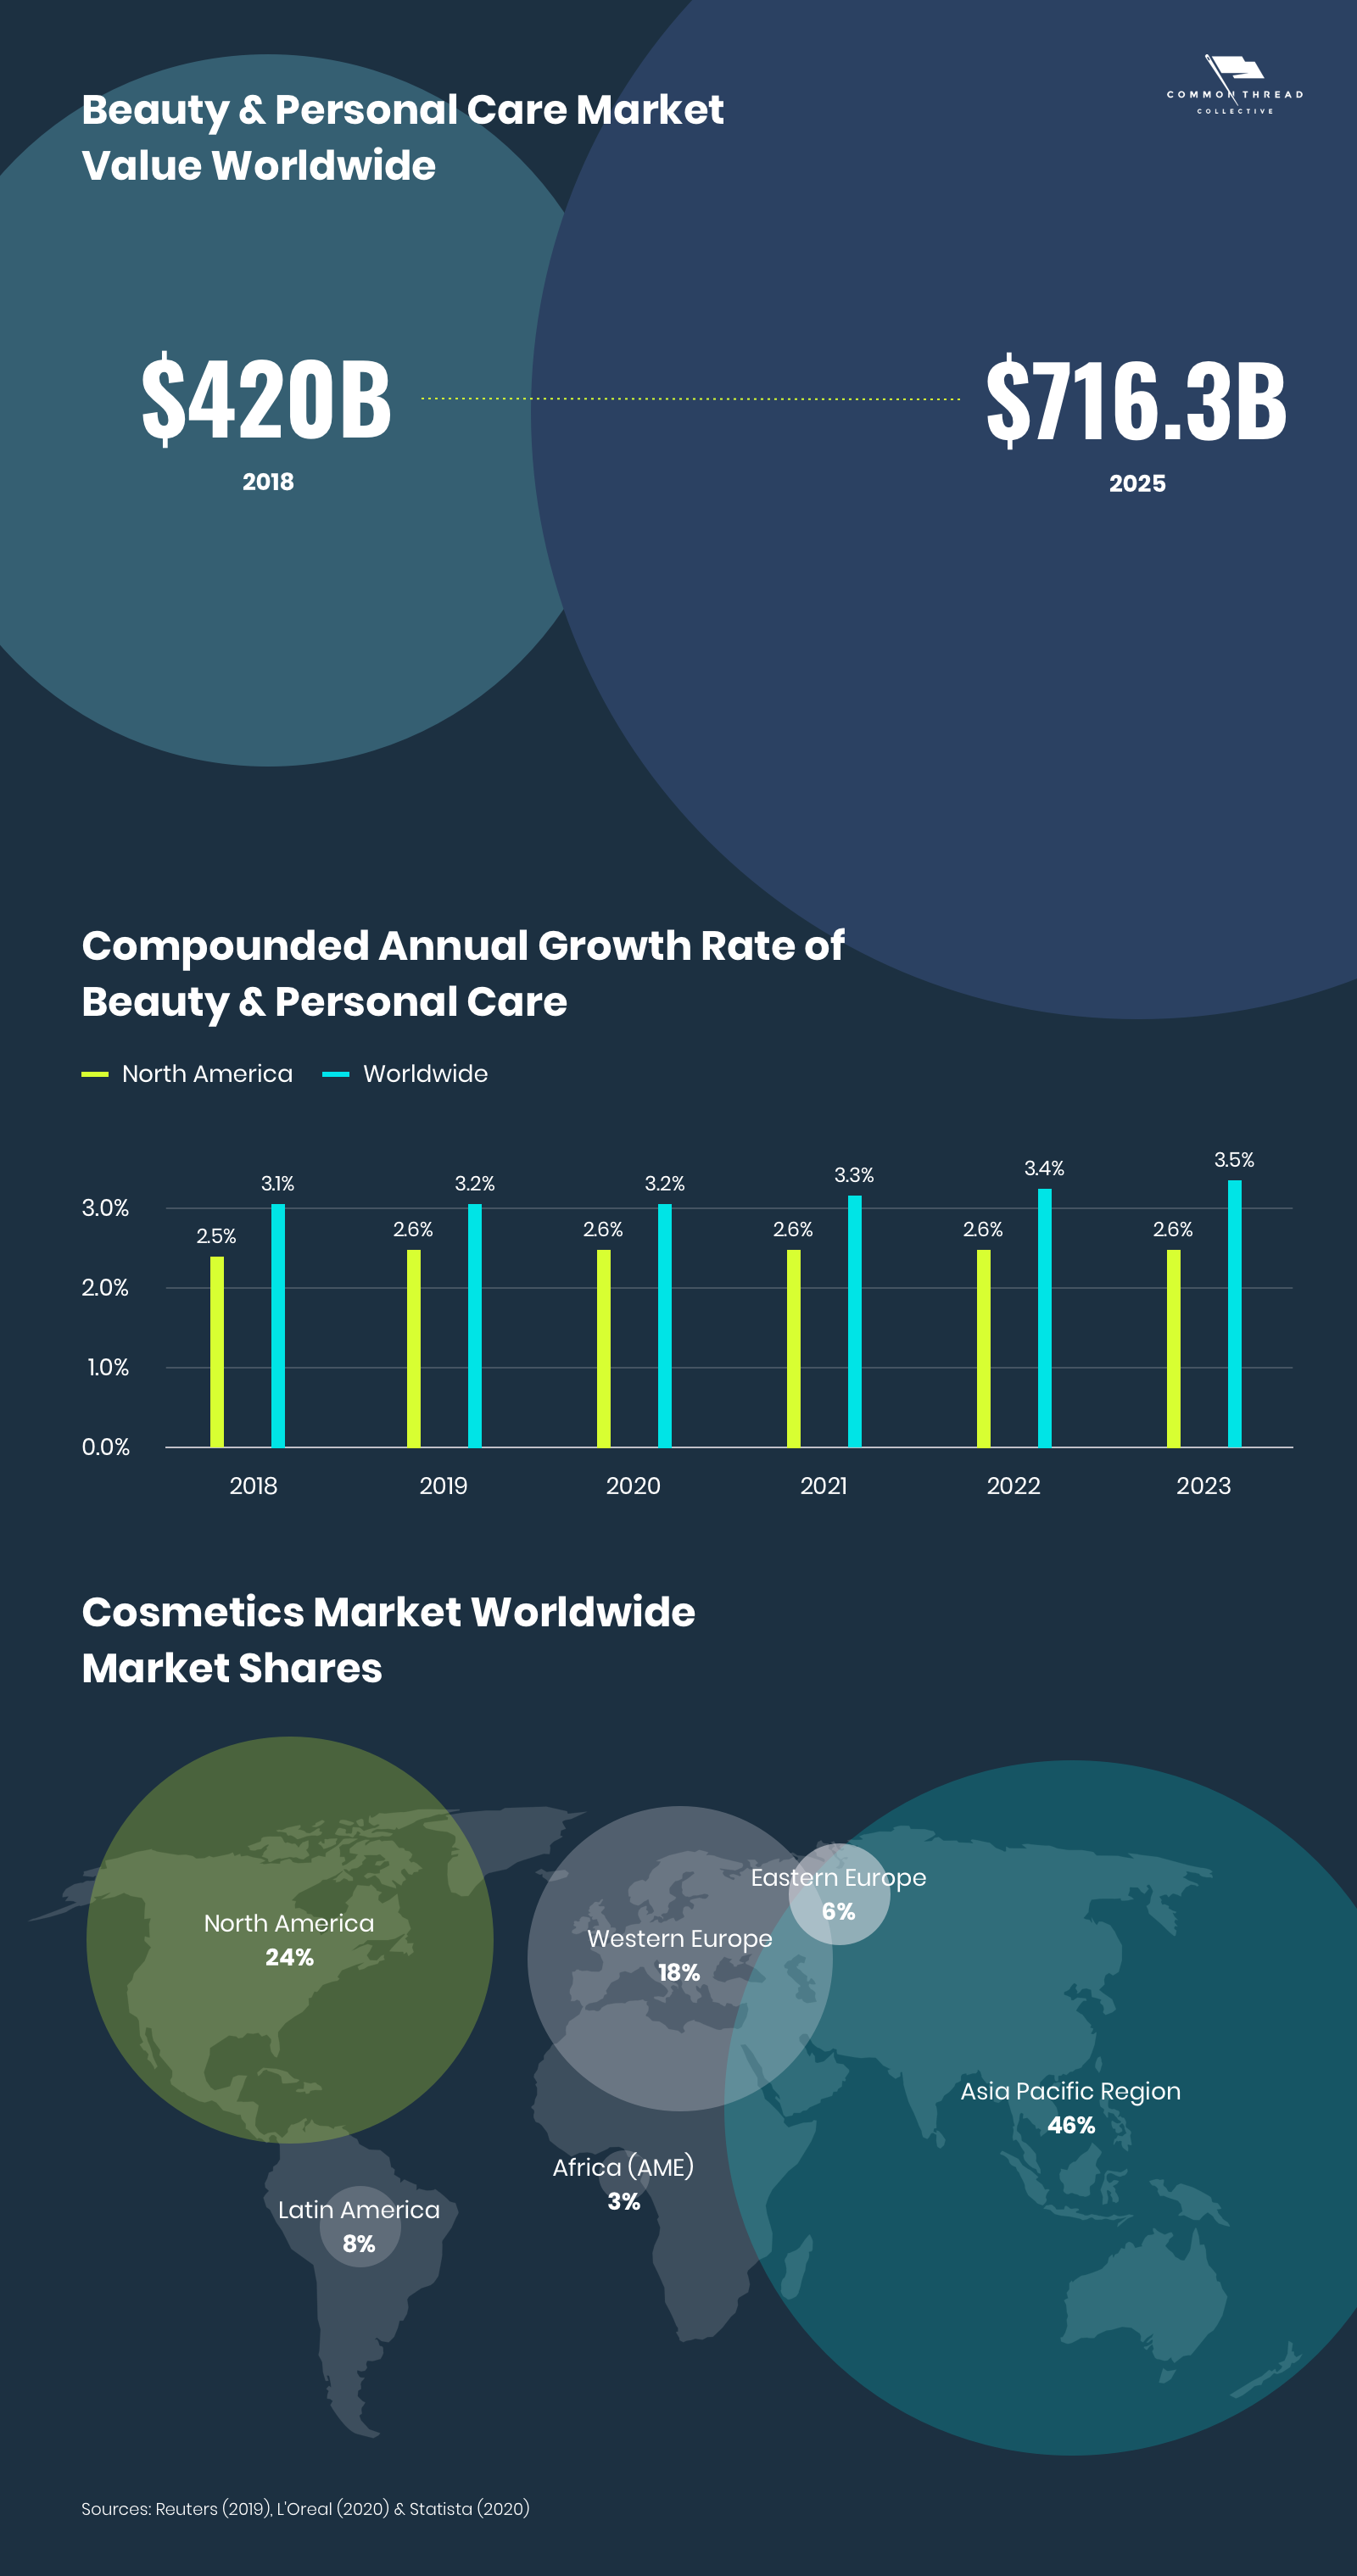 Beauty, Cosmetics, and Personal Care Markets Worldwide